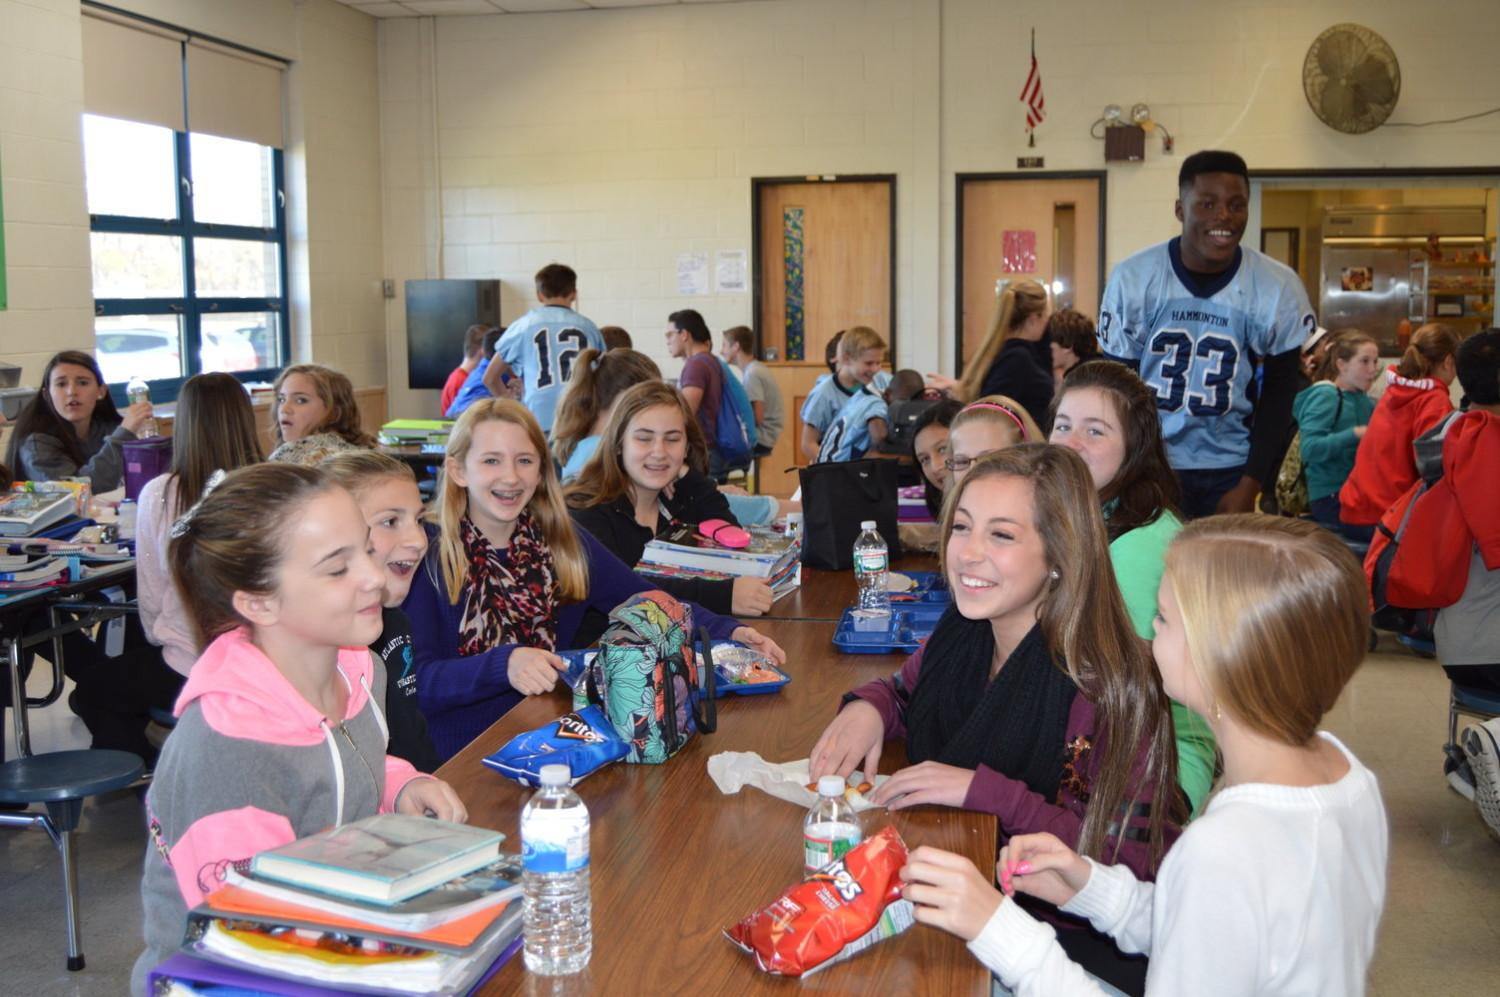 7th+grade+students+at+HMS+enjoying+their+lunch.